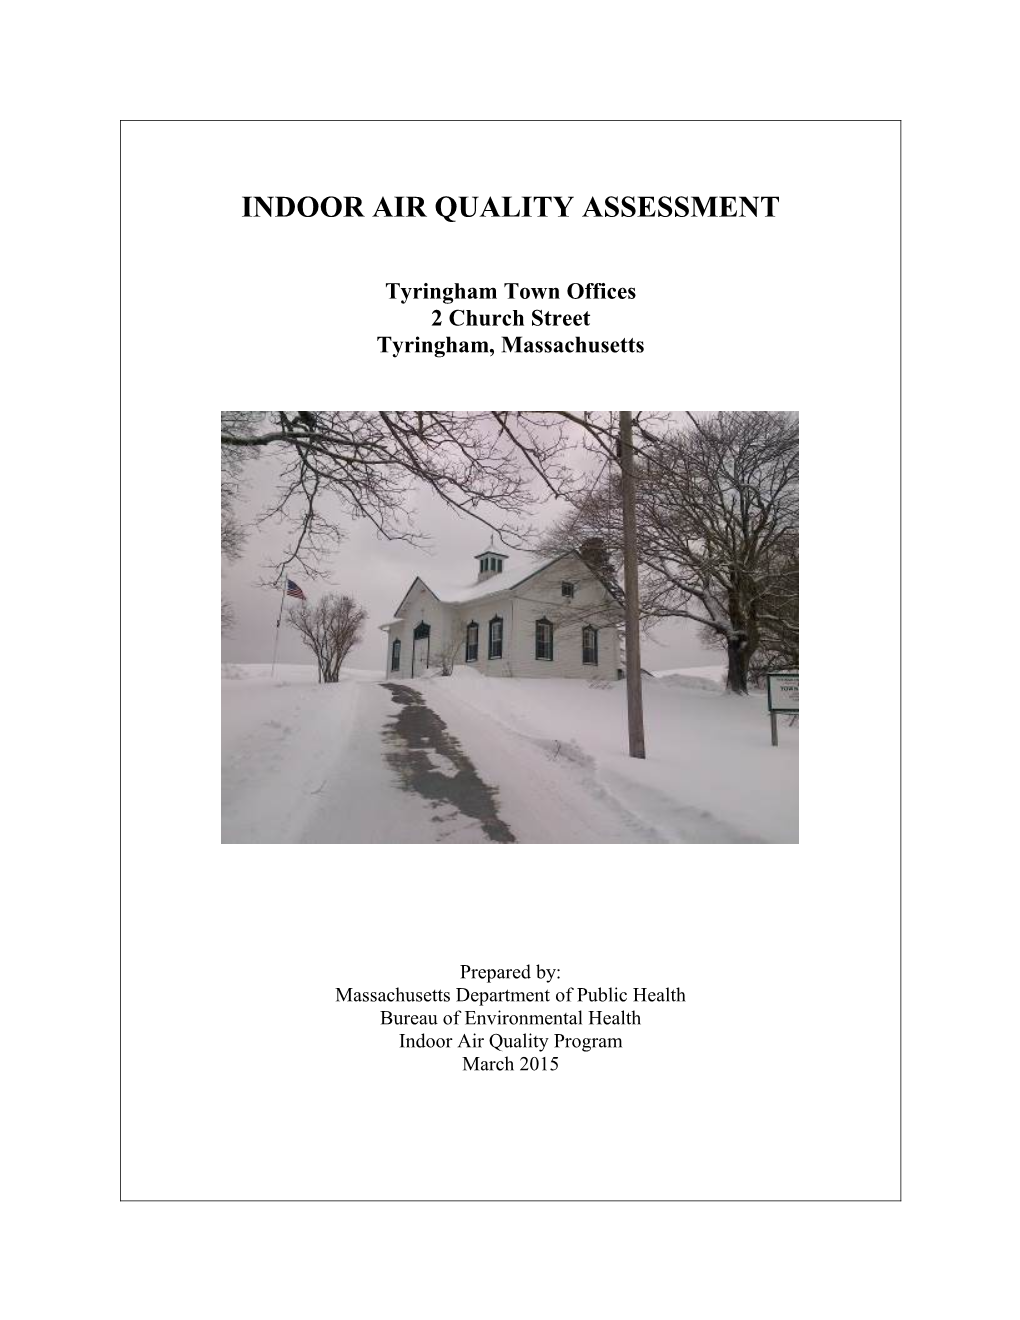 Indoor Air Quality Assessment - Tyringham Town Offices